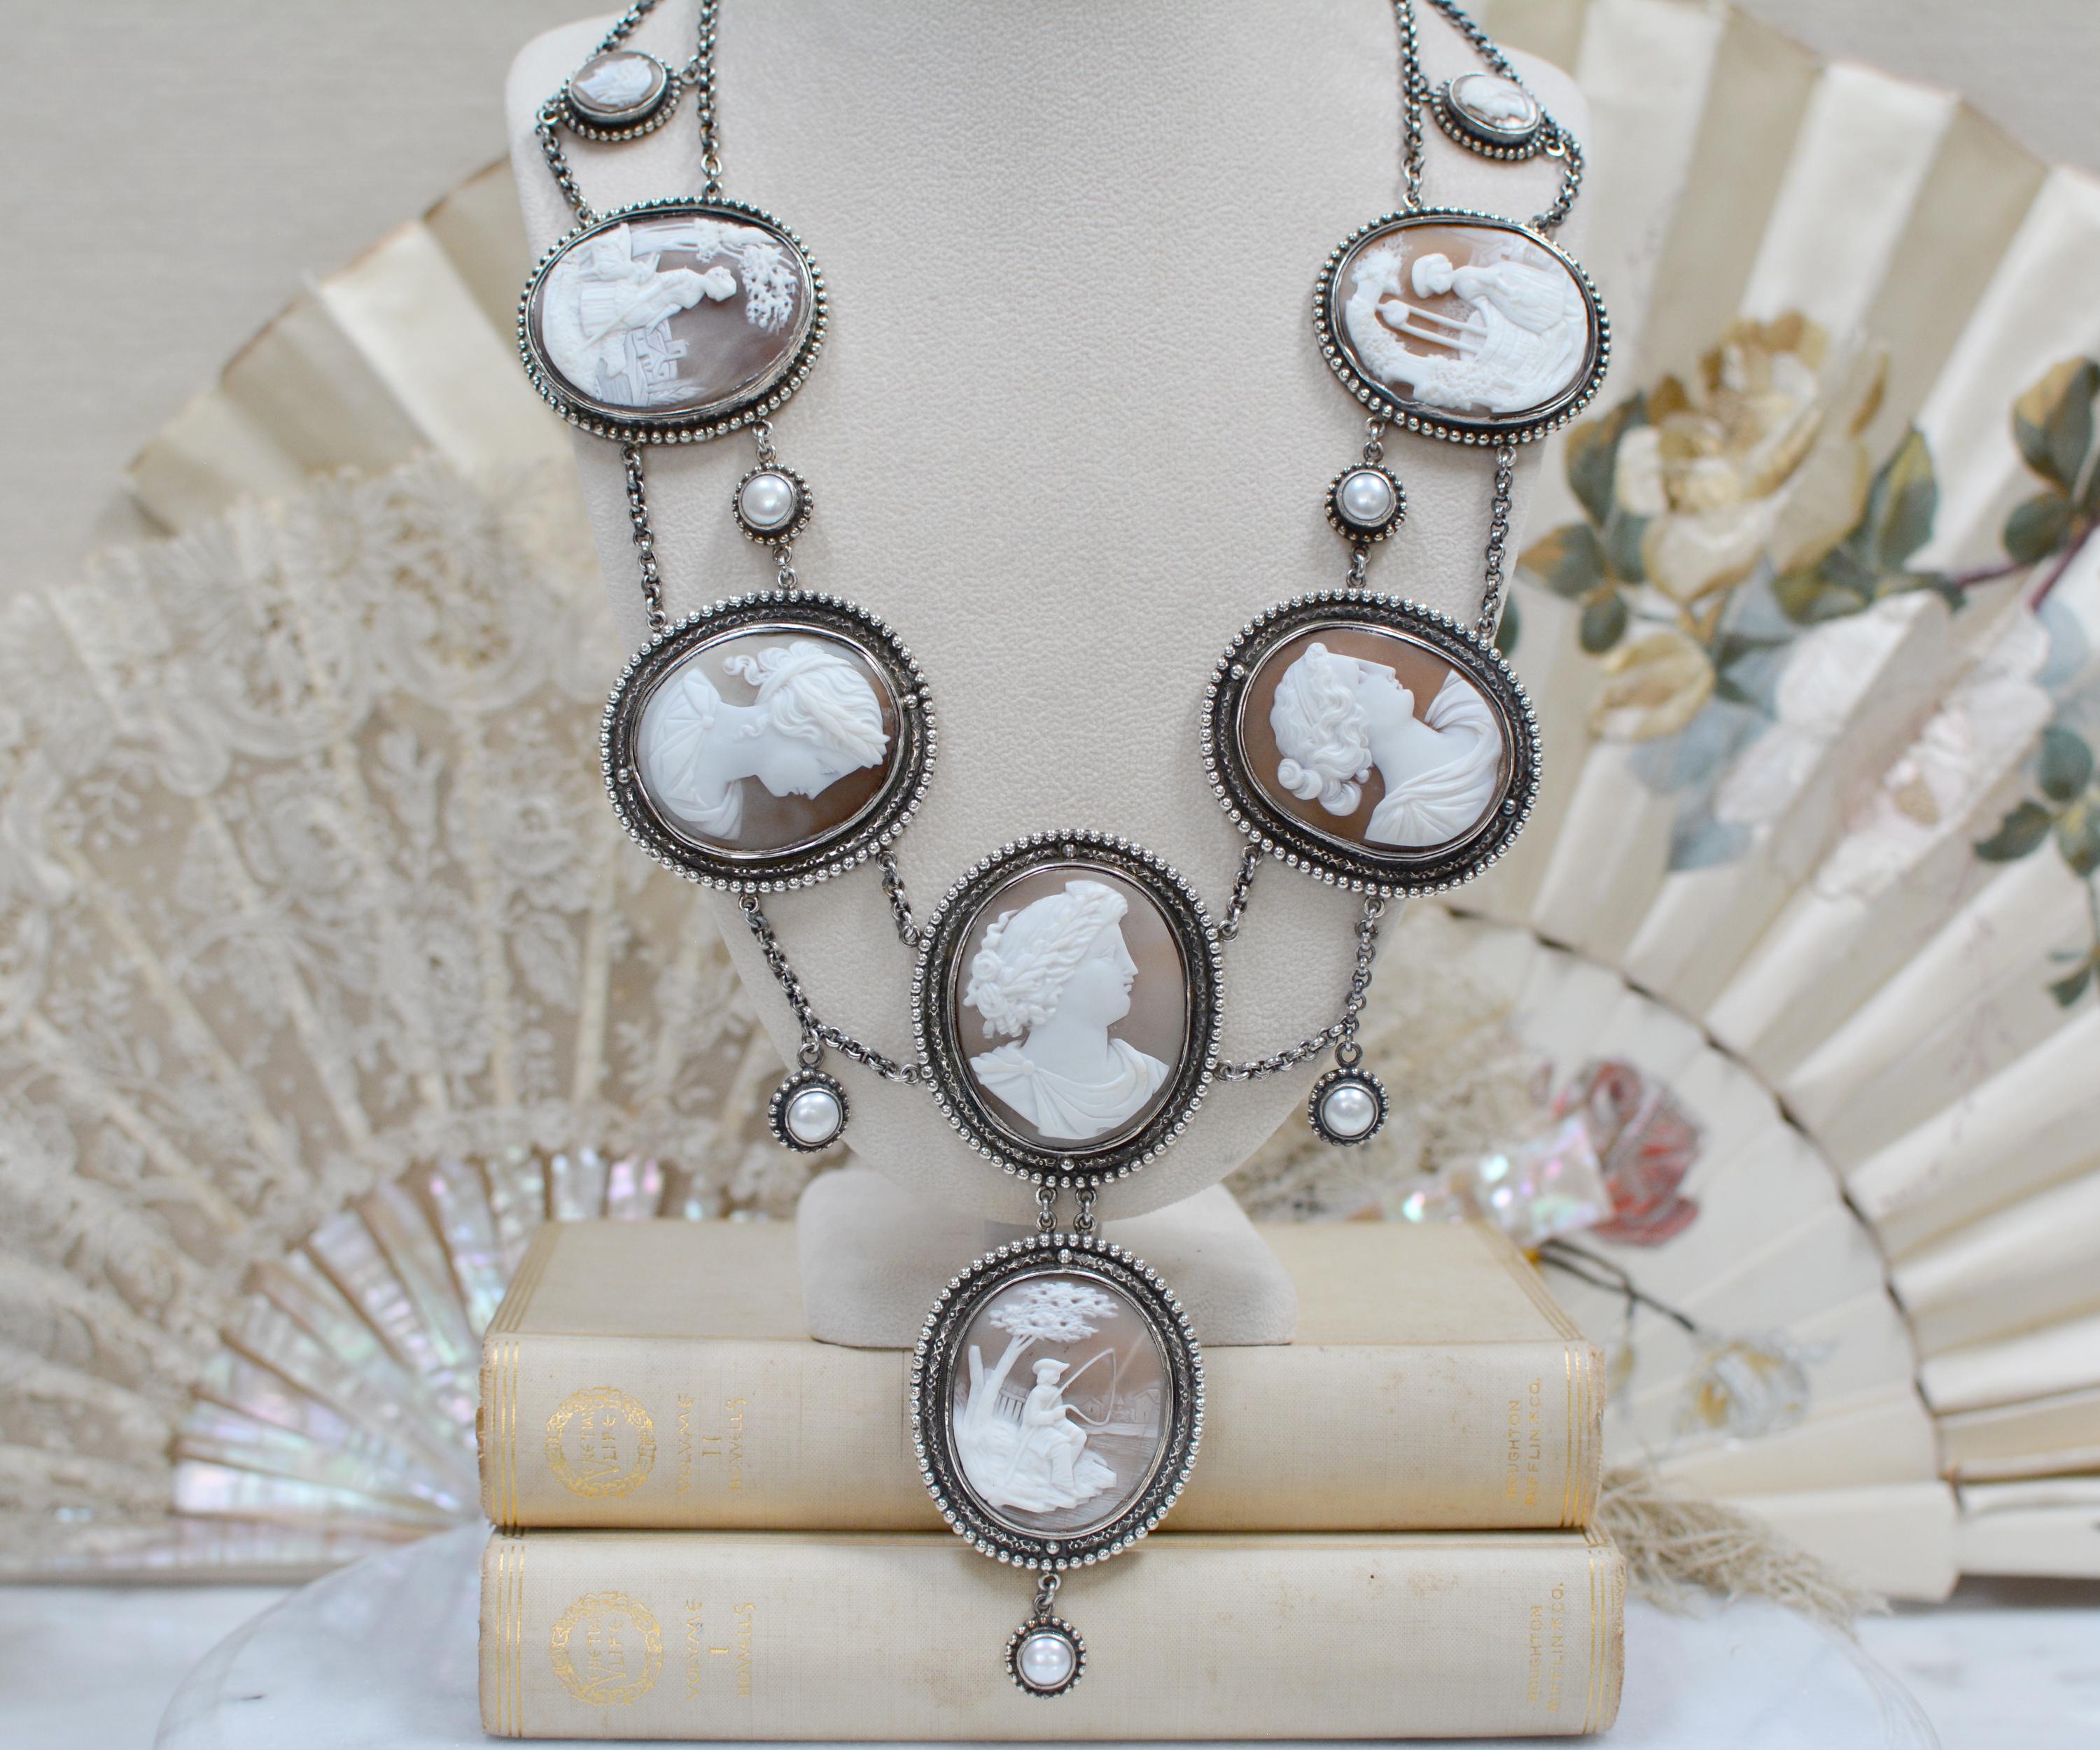 This divine legacy necklace designed in the Elizabethan style features a suite of six very fine antique nineteenth century shell Cameos. Created in Italy as a set for a wealthy patron - each of the large cameos measures 1.88 x 1.50. Four of the six